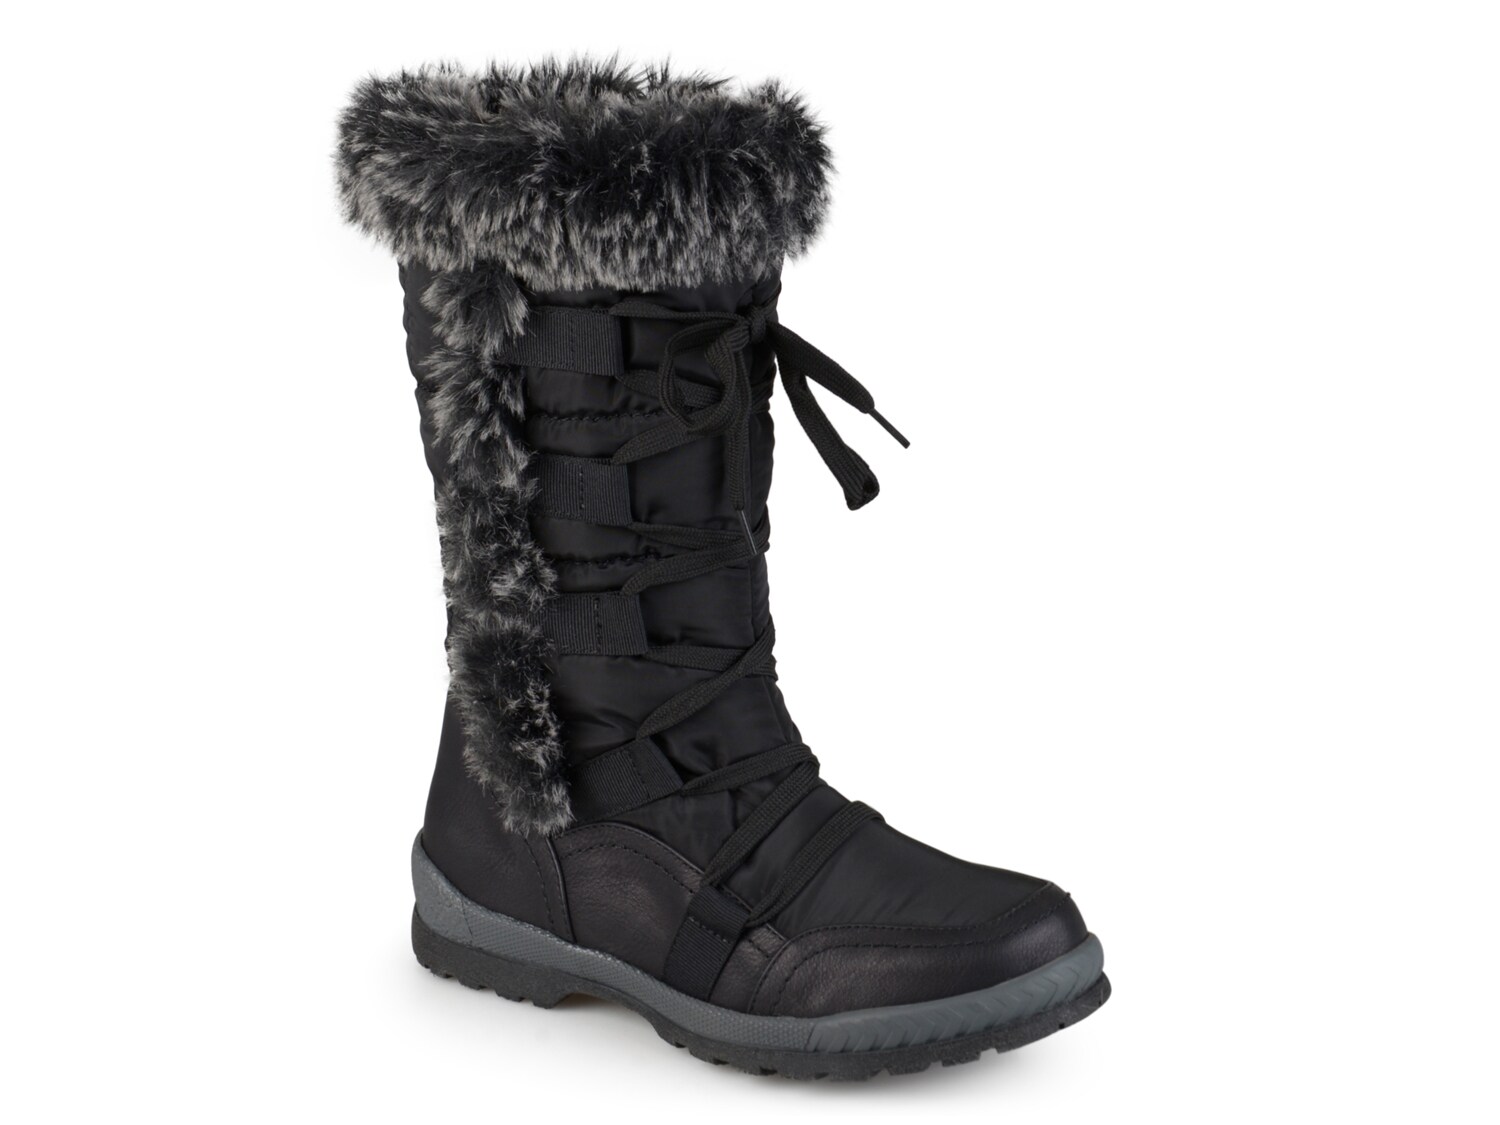 Journee Collection Pelt Boot - Free Shipping | DSW